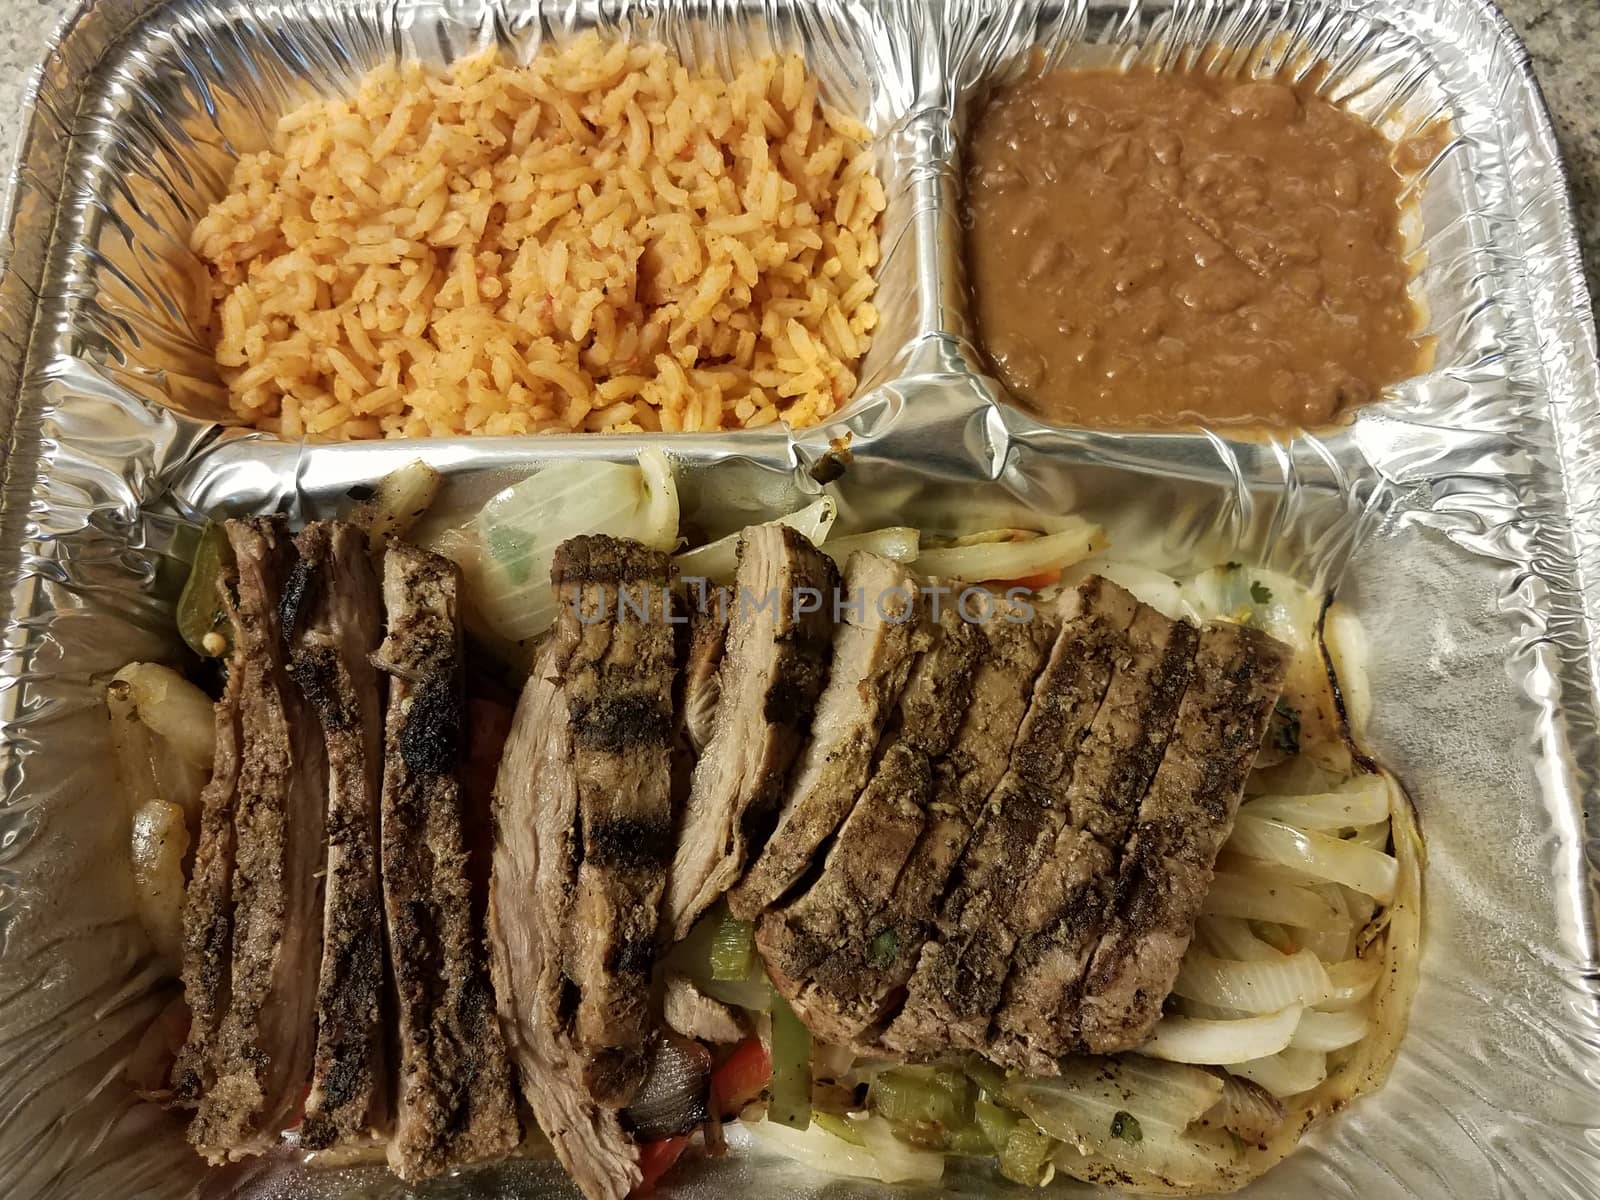 steak fajita meat with rice and beans in metal container or tray